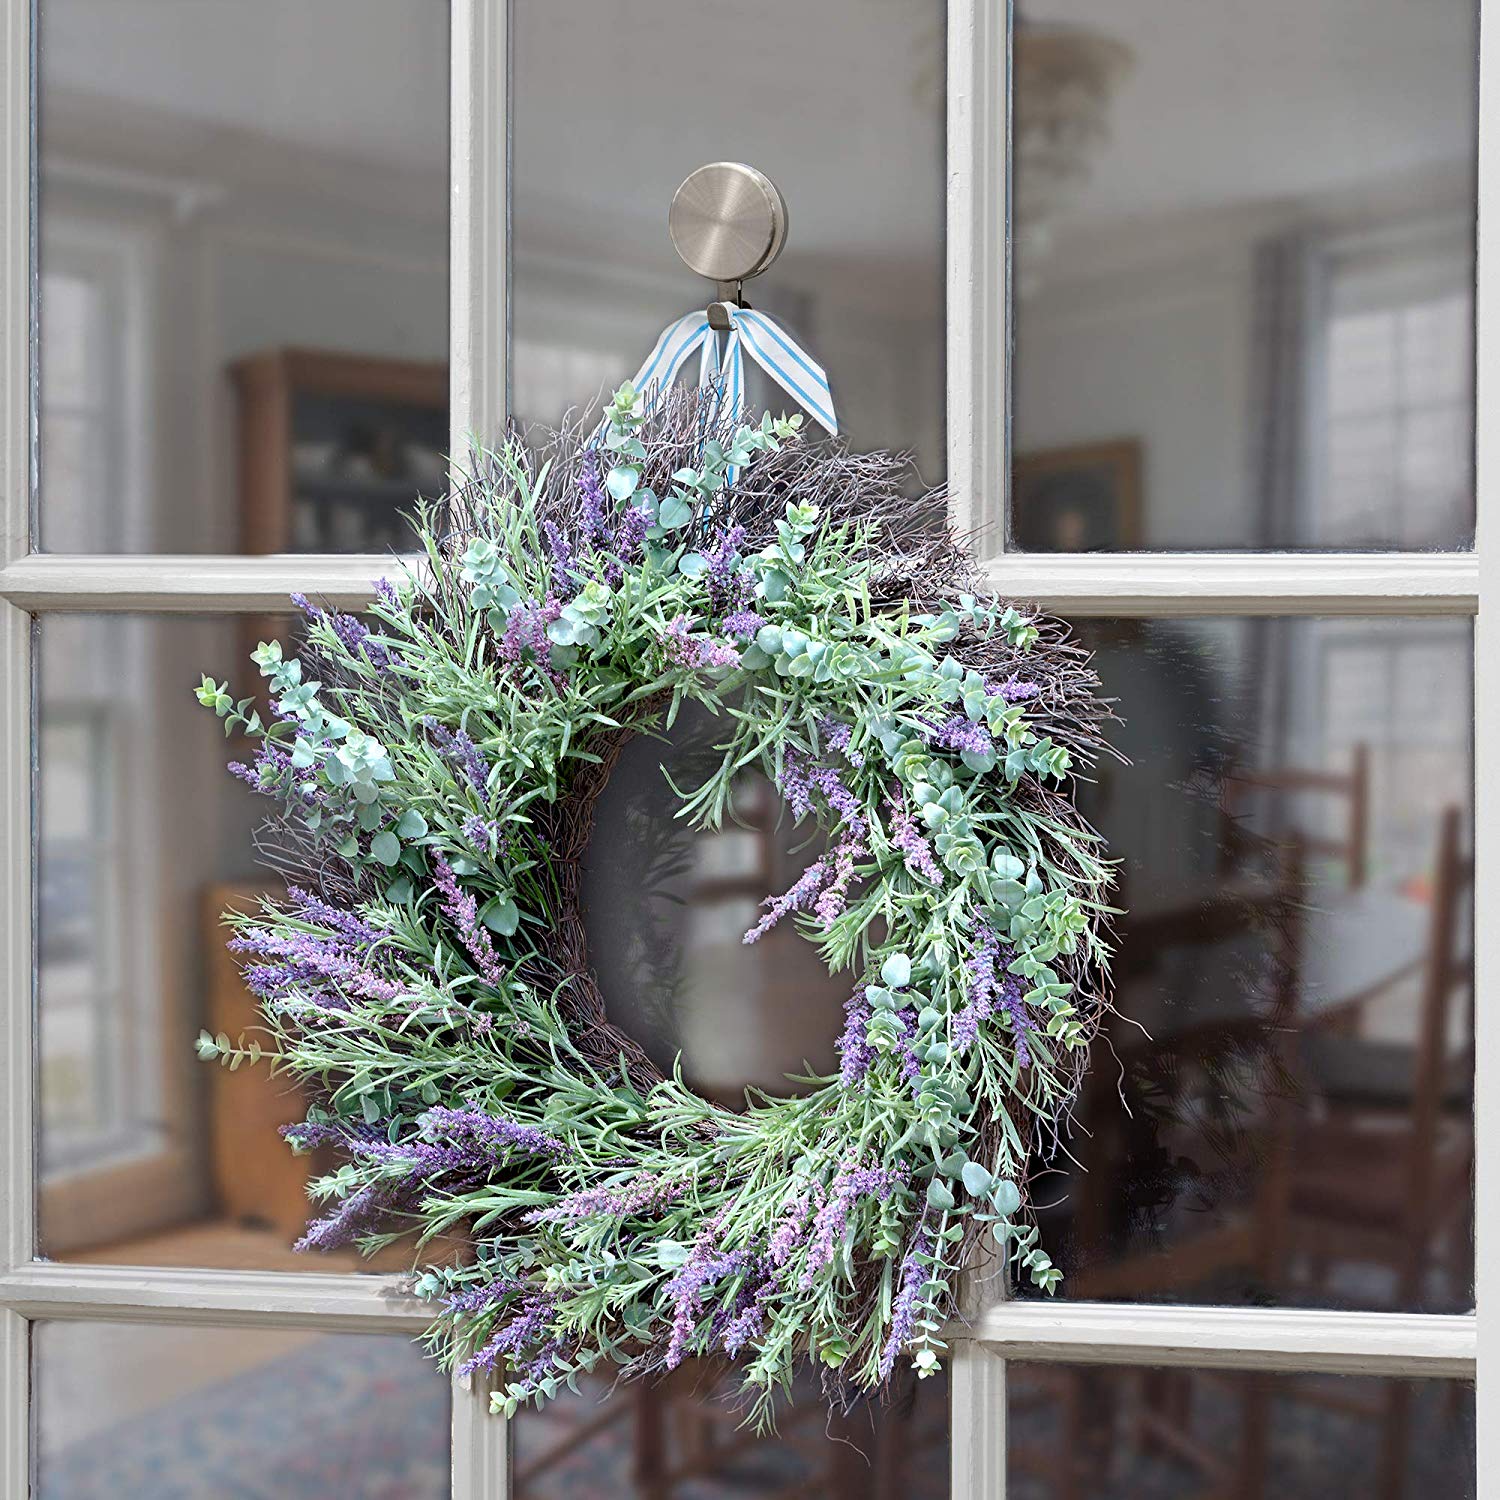 Small Christmas Wreaths In Windows